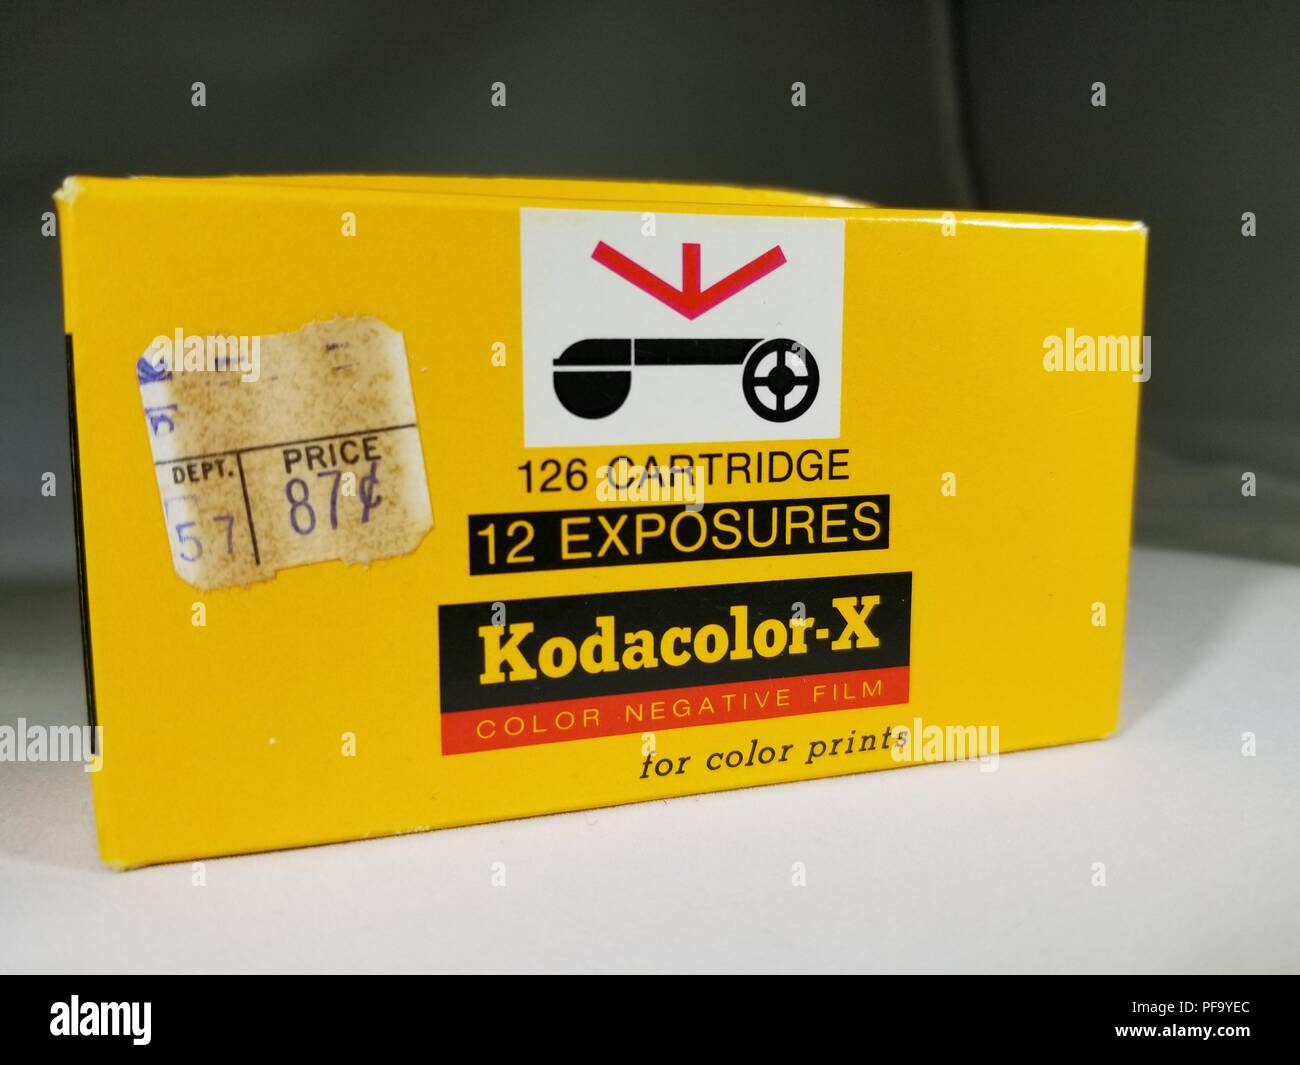 Close-up of yellow box of Kodak Kodacolor X color negative camera film in 126 format, with original price of 87 cents, February 21, 2018. () Stock Photo